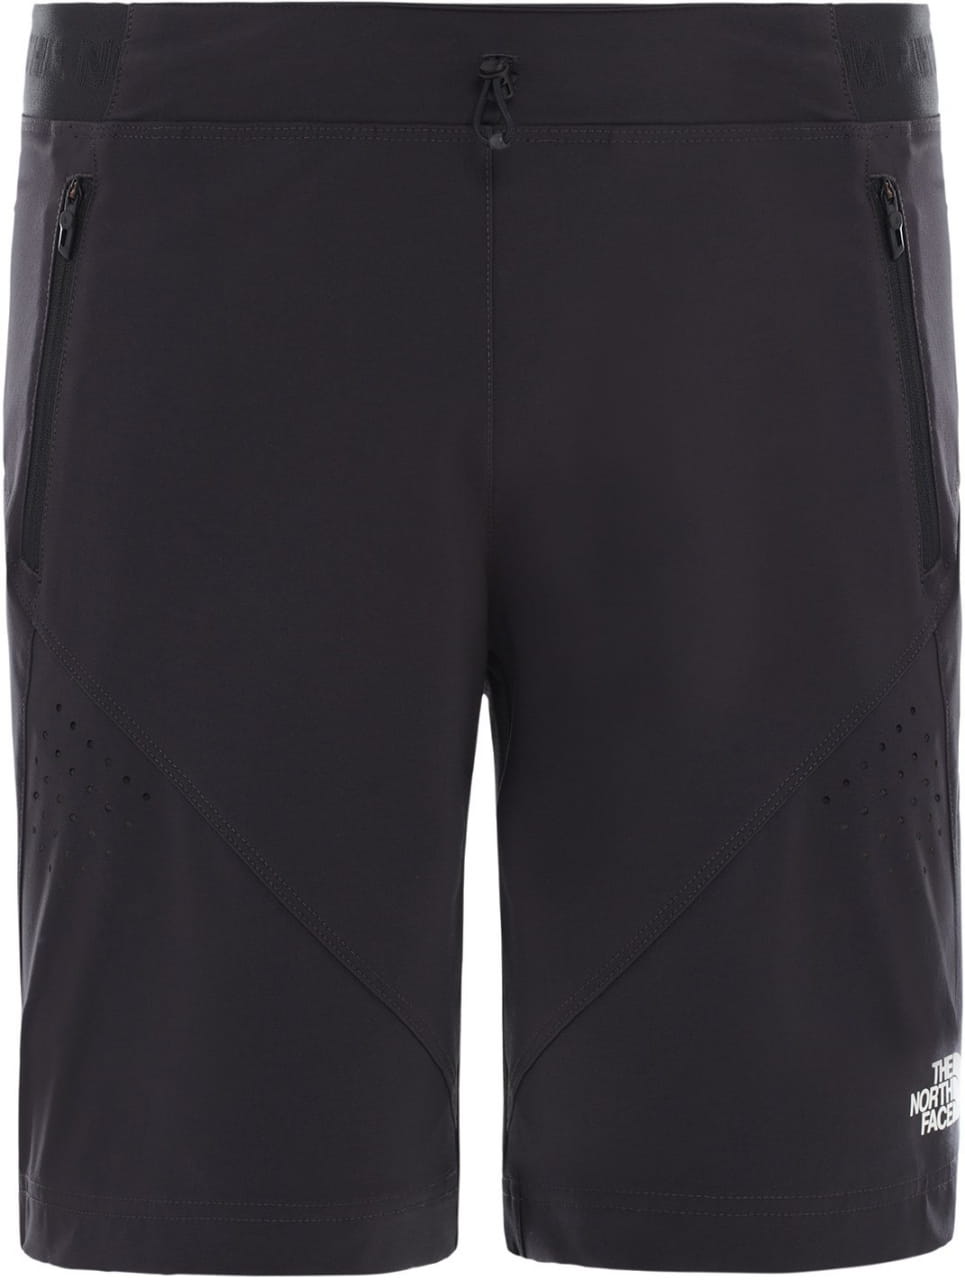 Shorts The North Face Women's Impendor Alpine Shorts